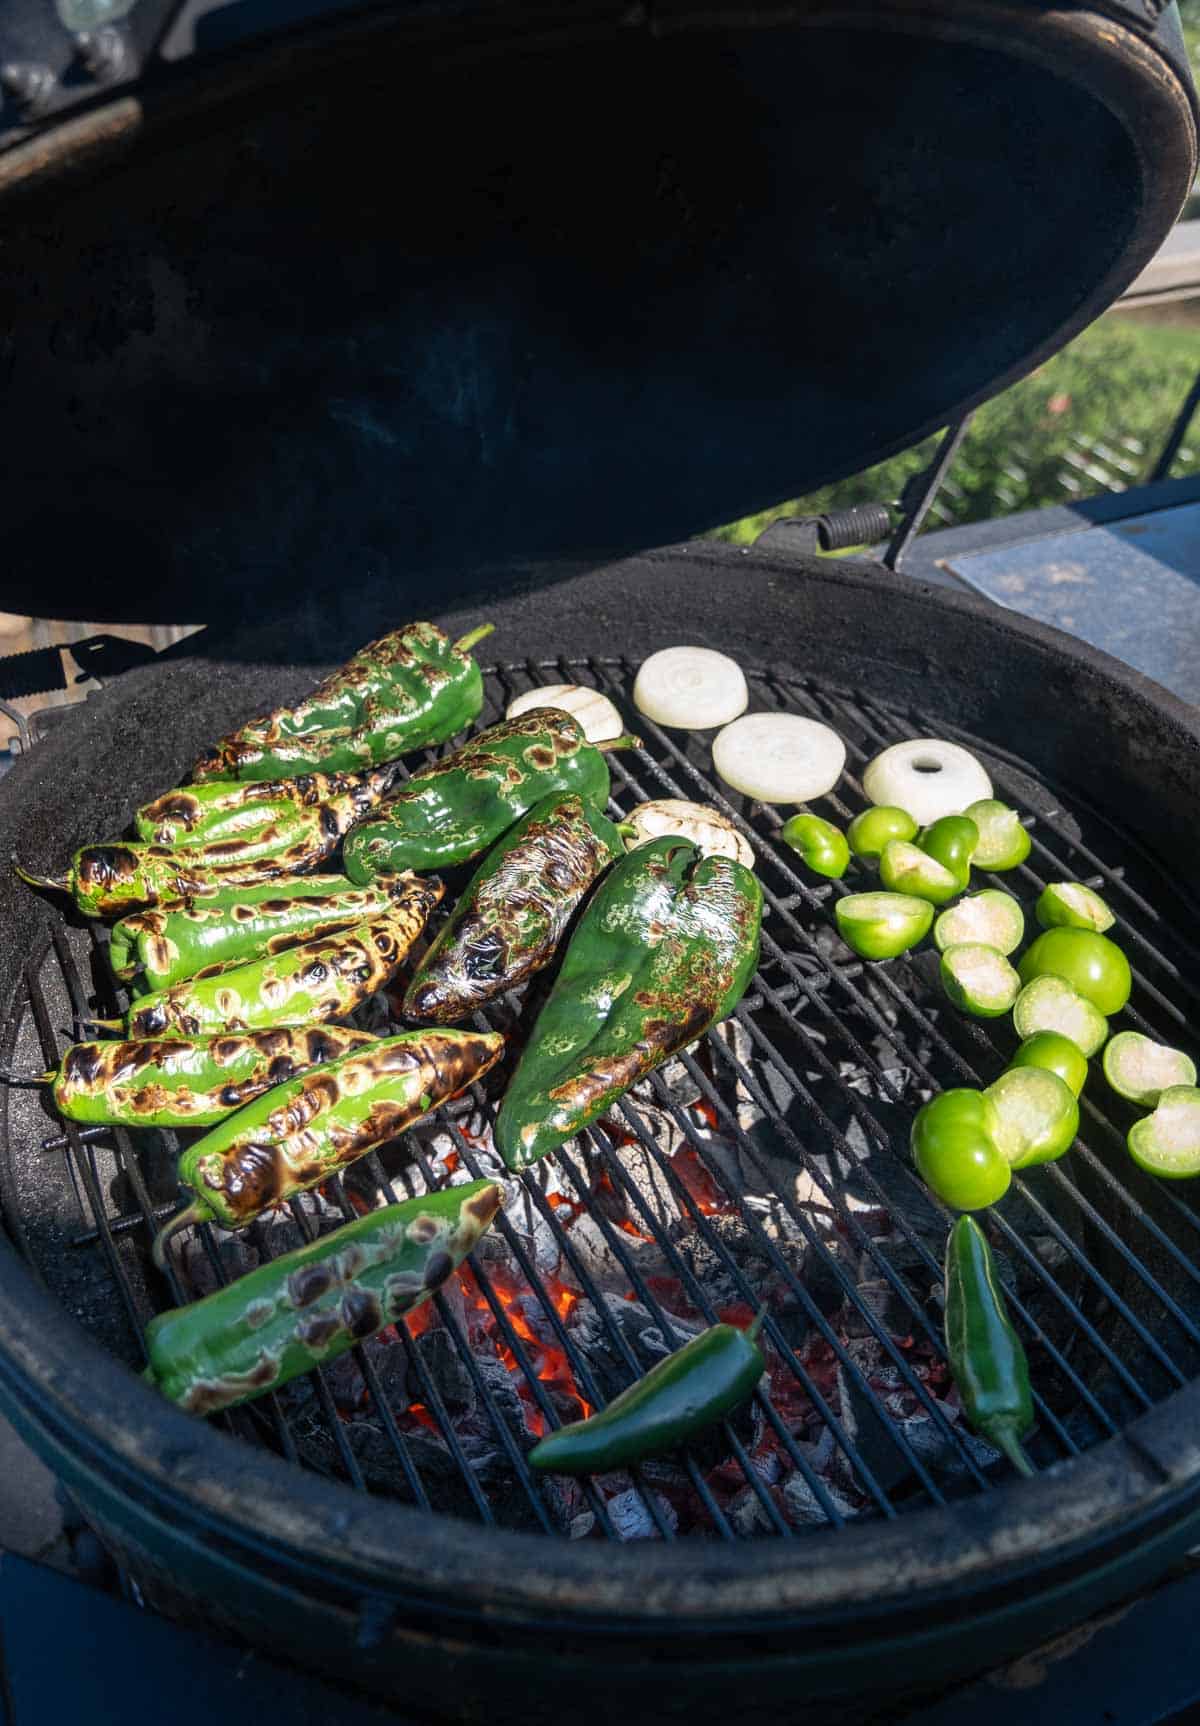 Ingredients over direct heat on a big green egg for green chile salsa including peppers and onions.